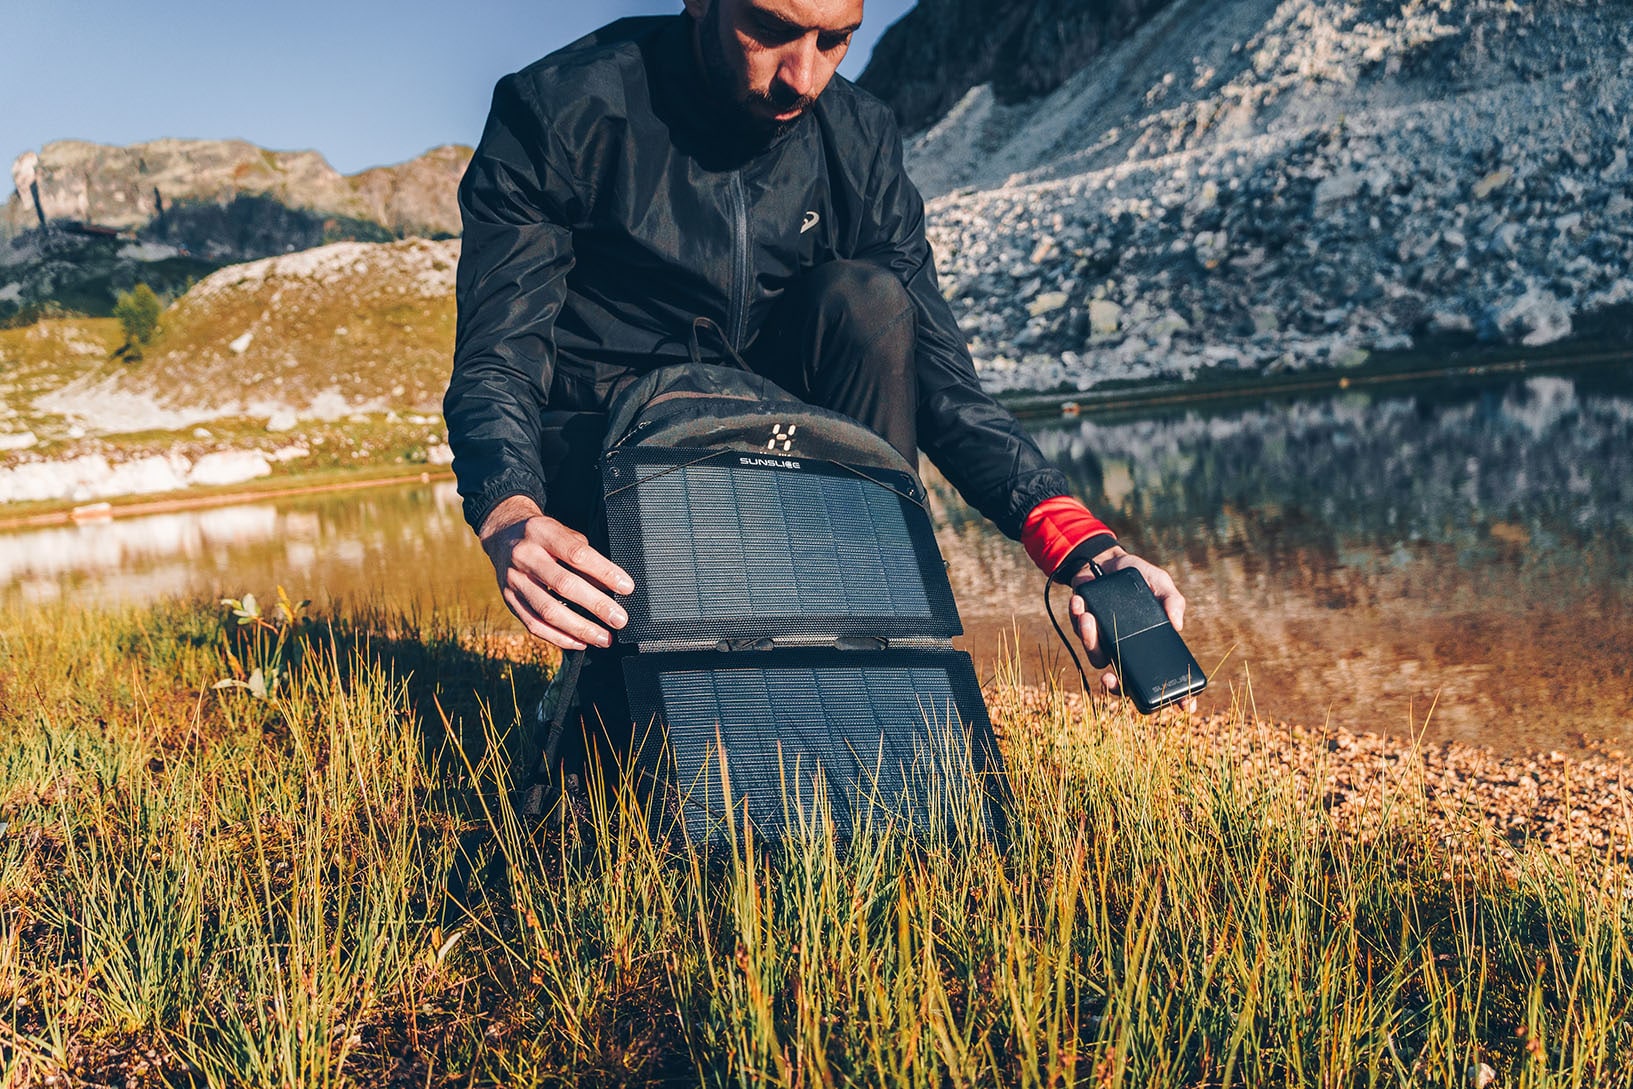 Portable solar panel ( Sunslice fusion flex 12) and a power bank ( gravity 20) held by a man 